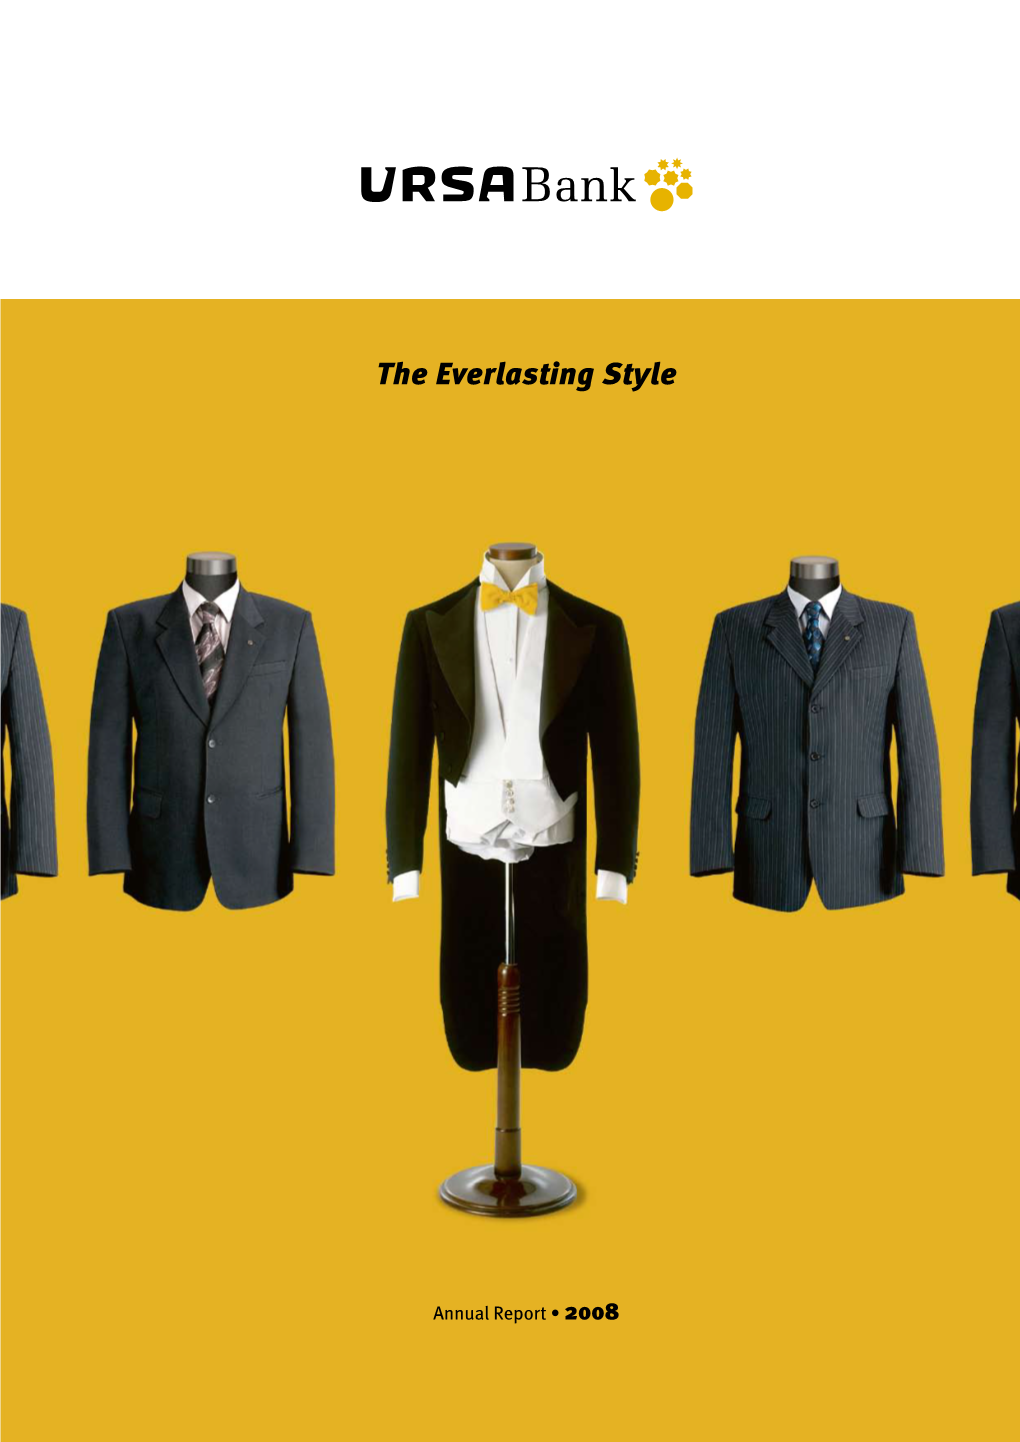 The Everlasting Style